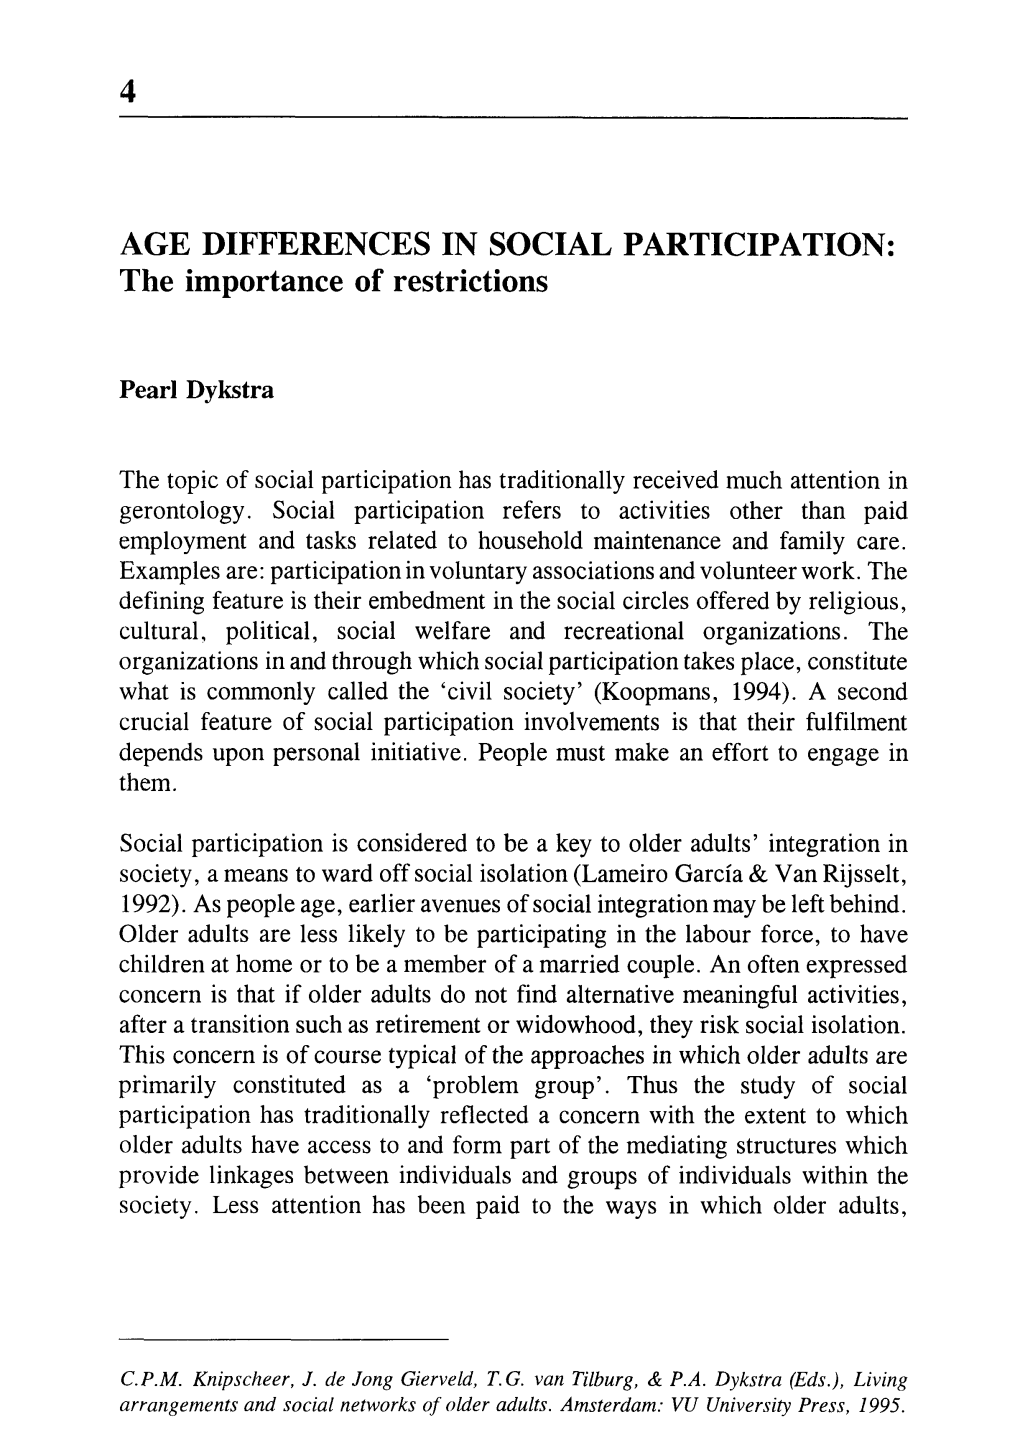 AGE DIFFERENCES in SOCIAL PARTICIPATION: the Importance of Restrictions